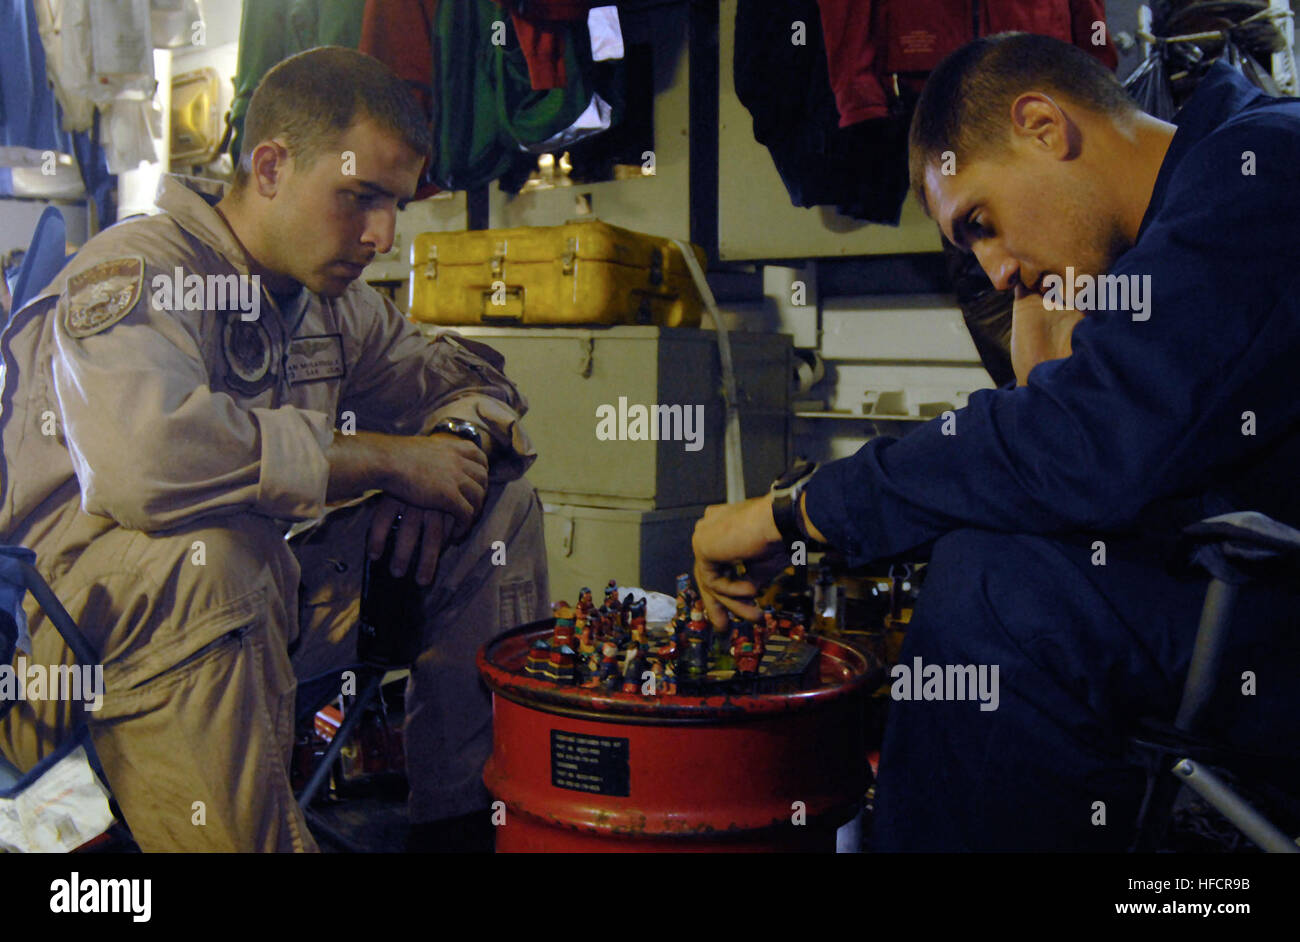 Petty Officer 3rd Class Brian McGarrigle and Petty Officer 3rd Class Jonathan Cronkhite, both assigned to the Battle Cats of Helicopter Anti-Submarine Squadron 43, Detachment 4, based in San Diego, play chess inside the hangar bay of the guided-missile frigate USS Ford. Ford is deployed with Southern Seas 2009, part of the U.S. Southern Command-led Partnership of the Americas mission focusing on strengthening relationship in the Southern Command area of Focus. Playing Chess 182365 Stock Photo